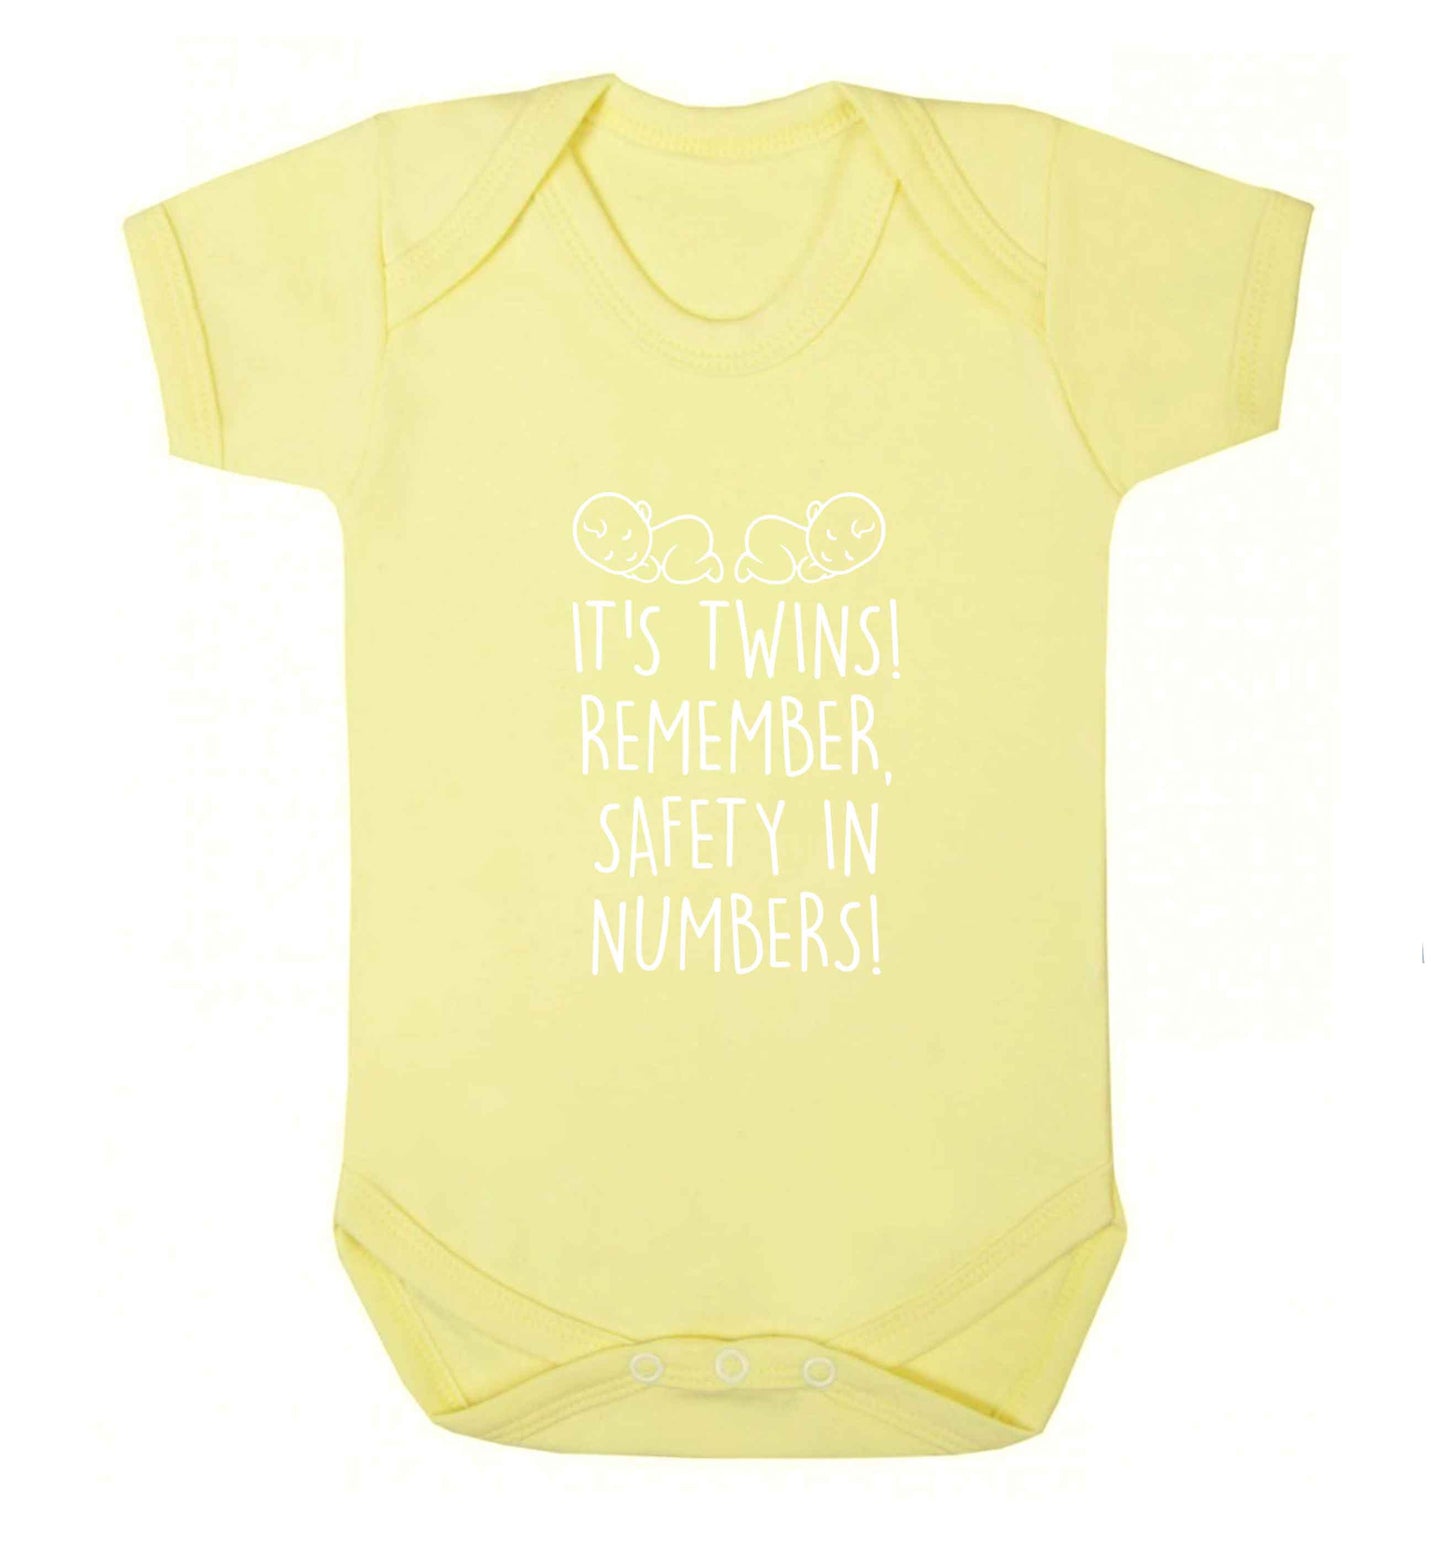 It's twins! Remember safety in numbers! baby vest pale yellow 18-24 months